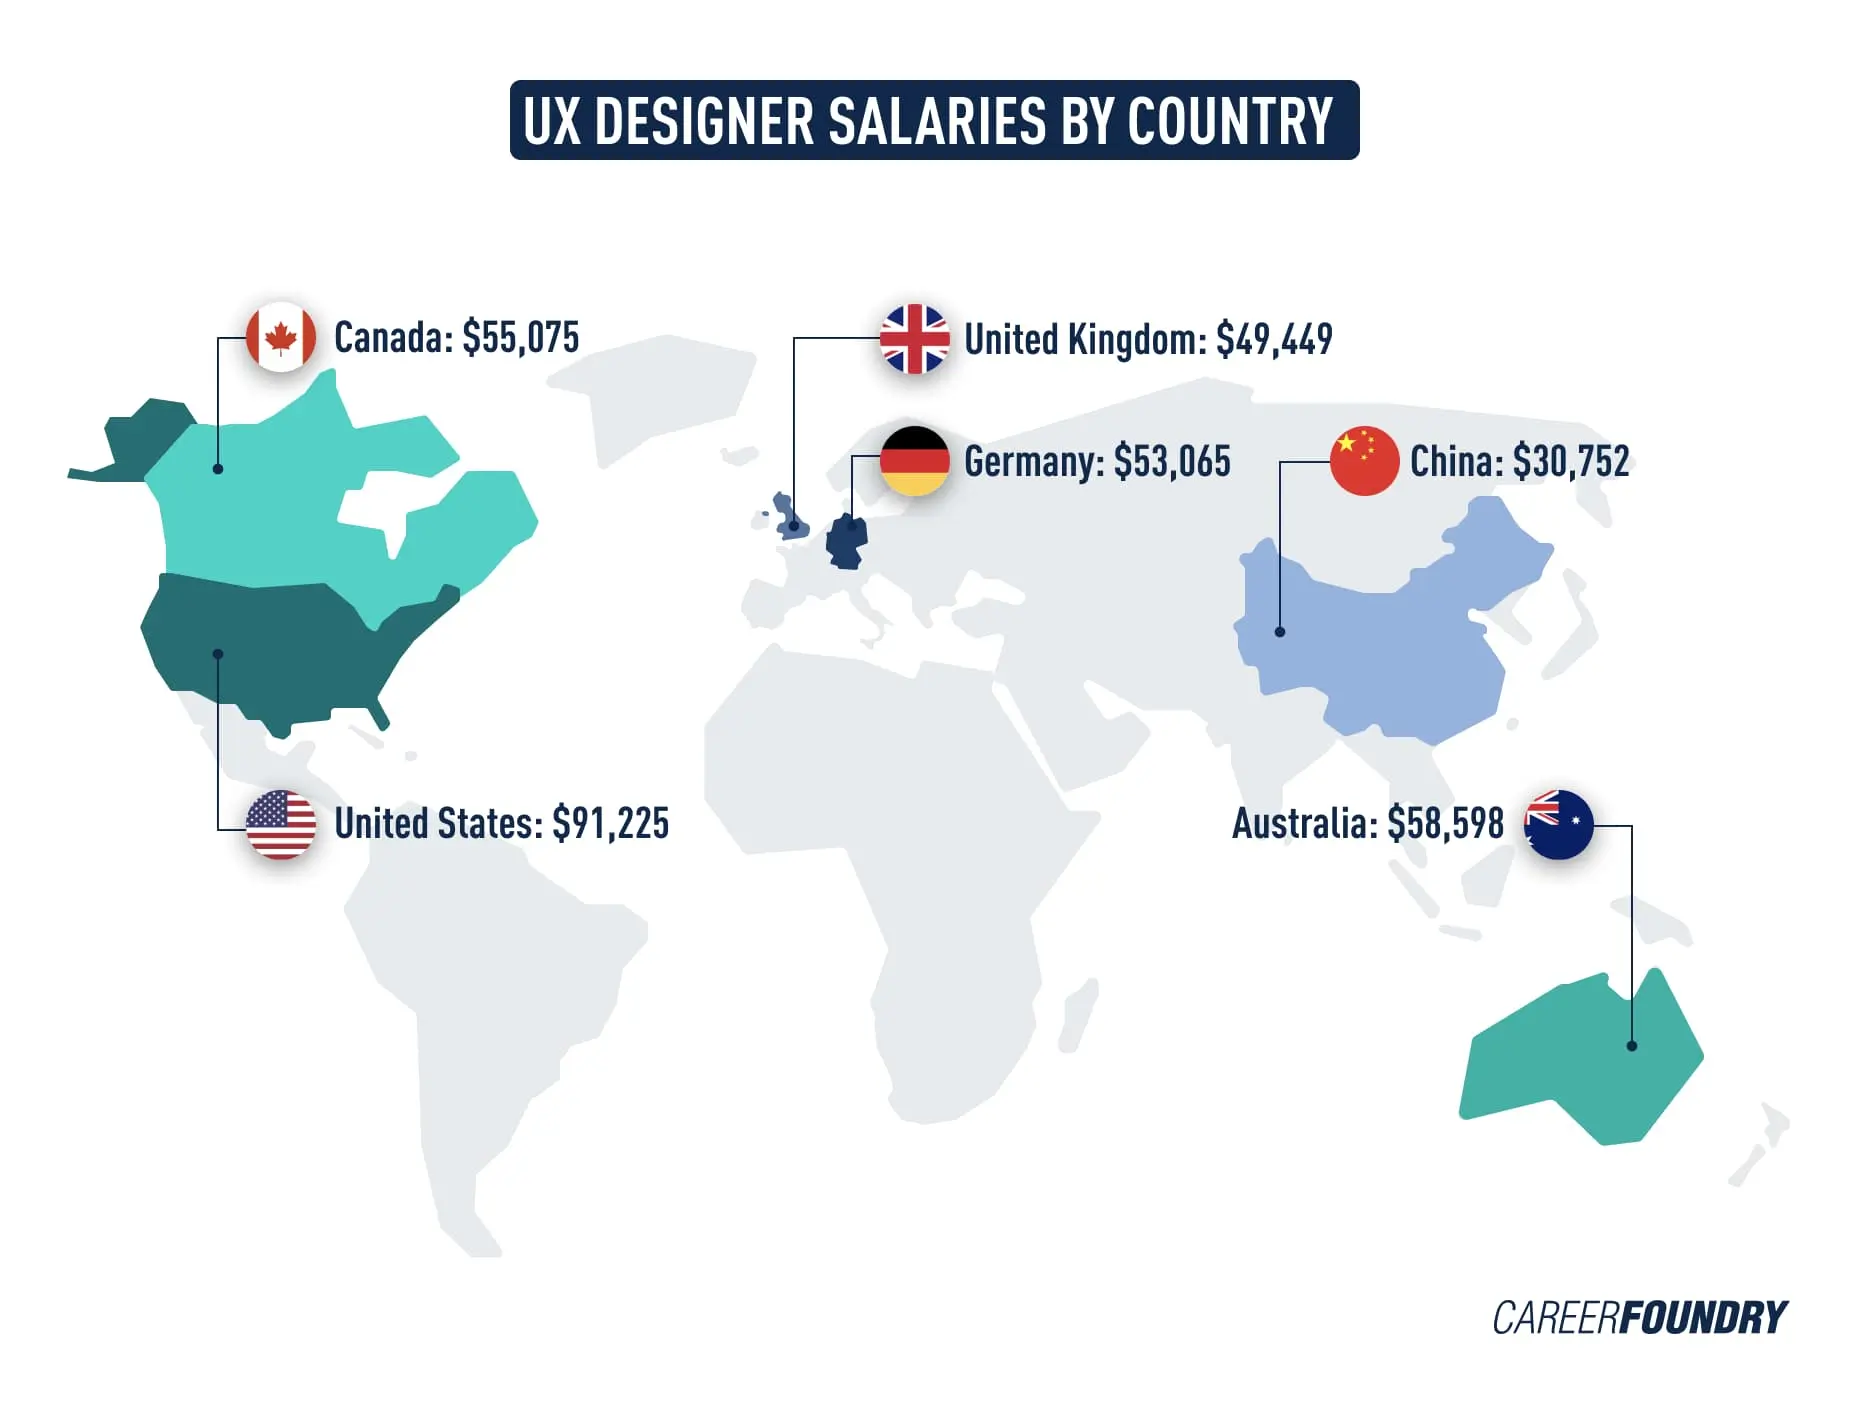 UX designer salaries by country infographic